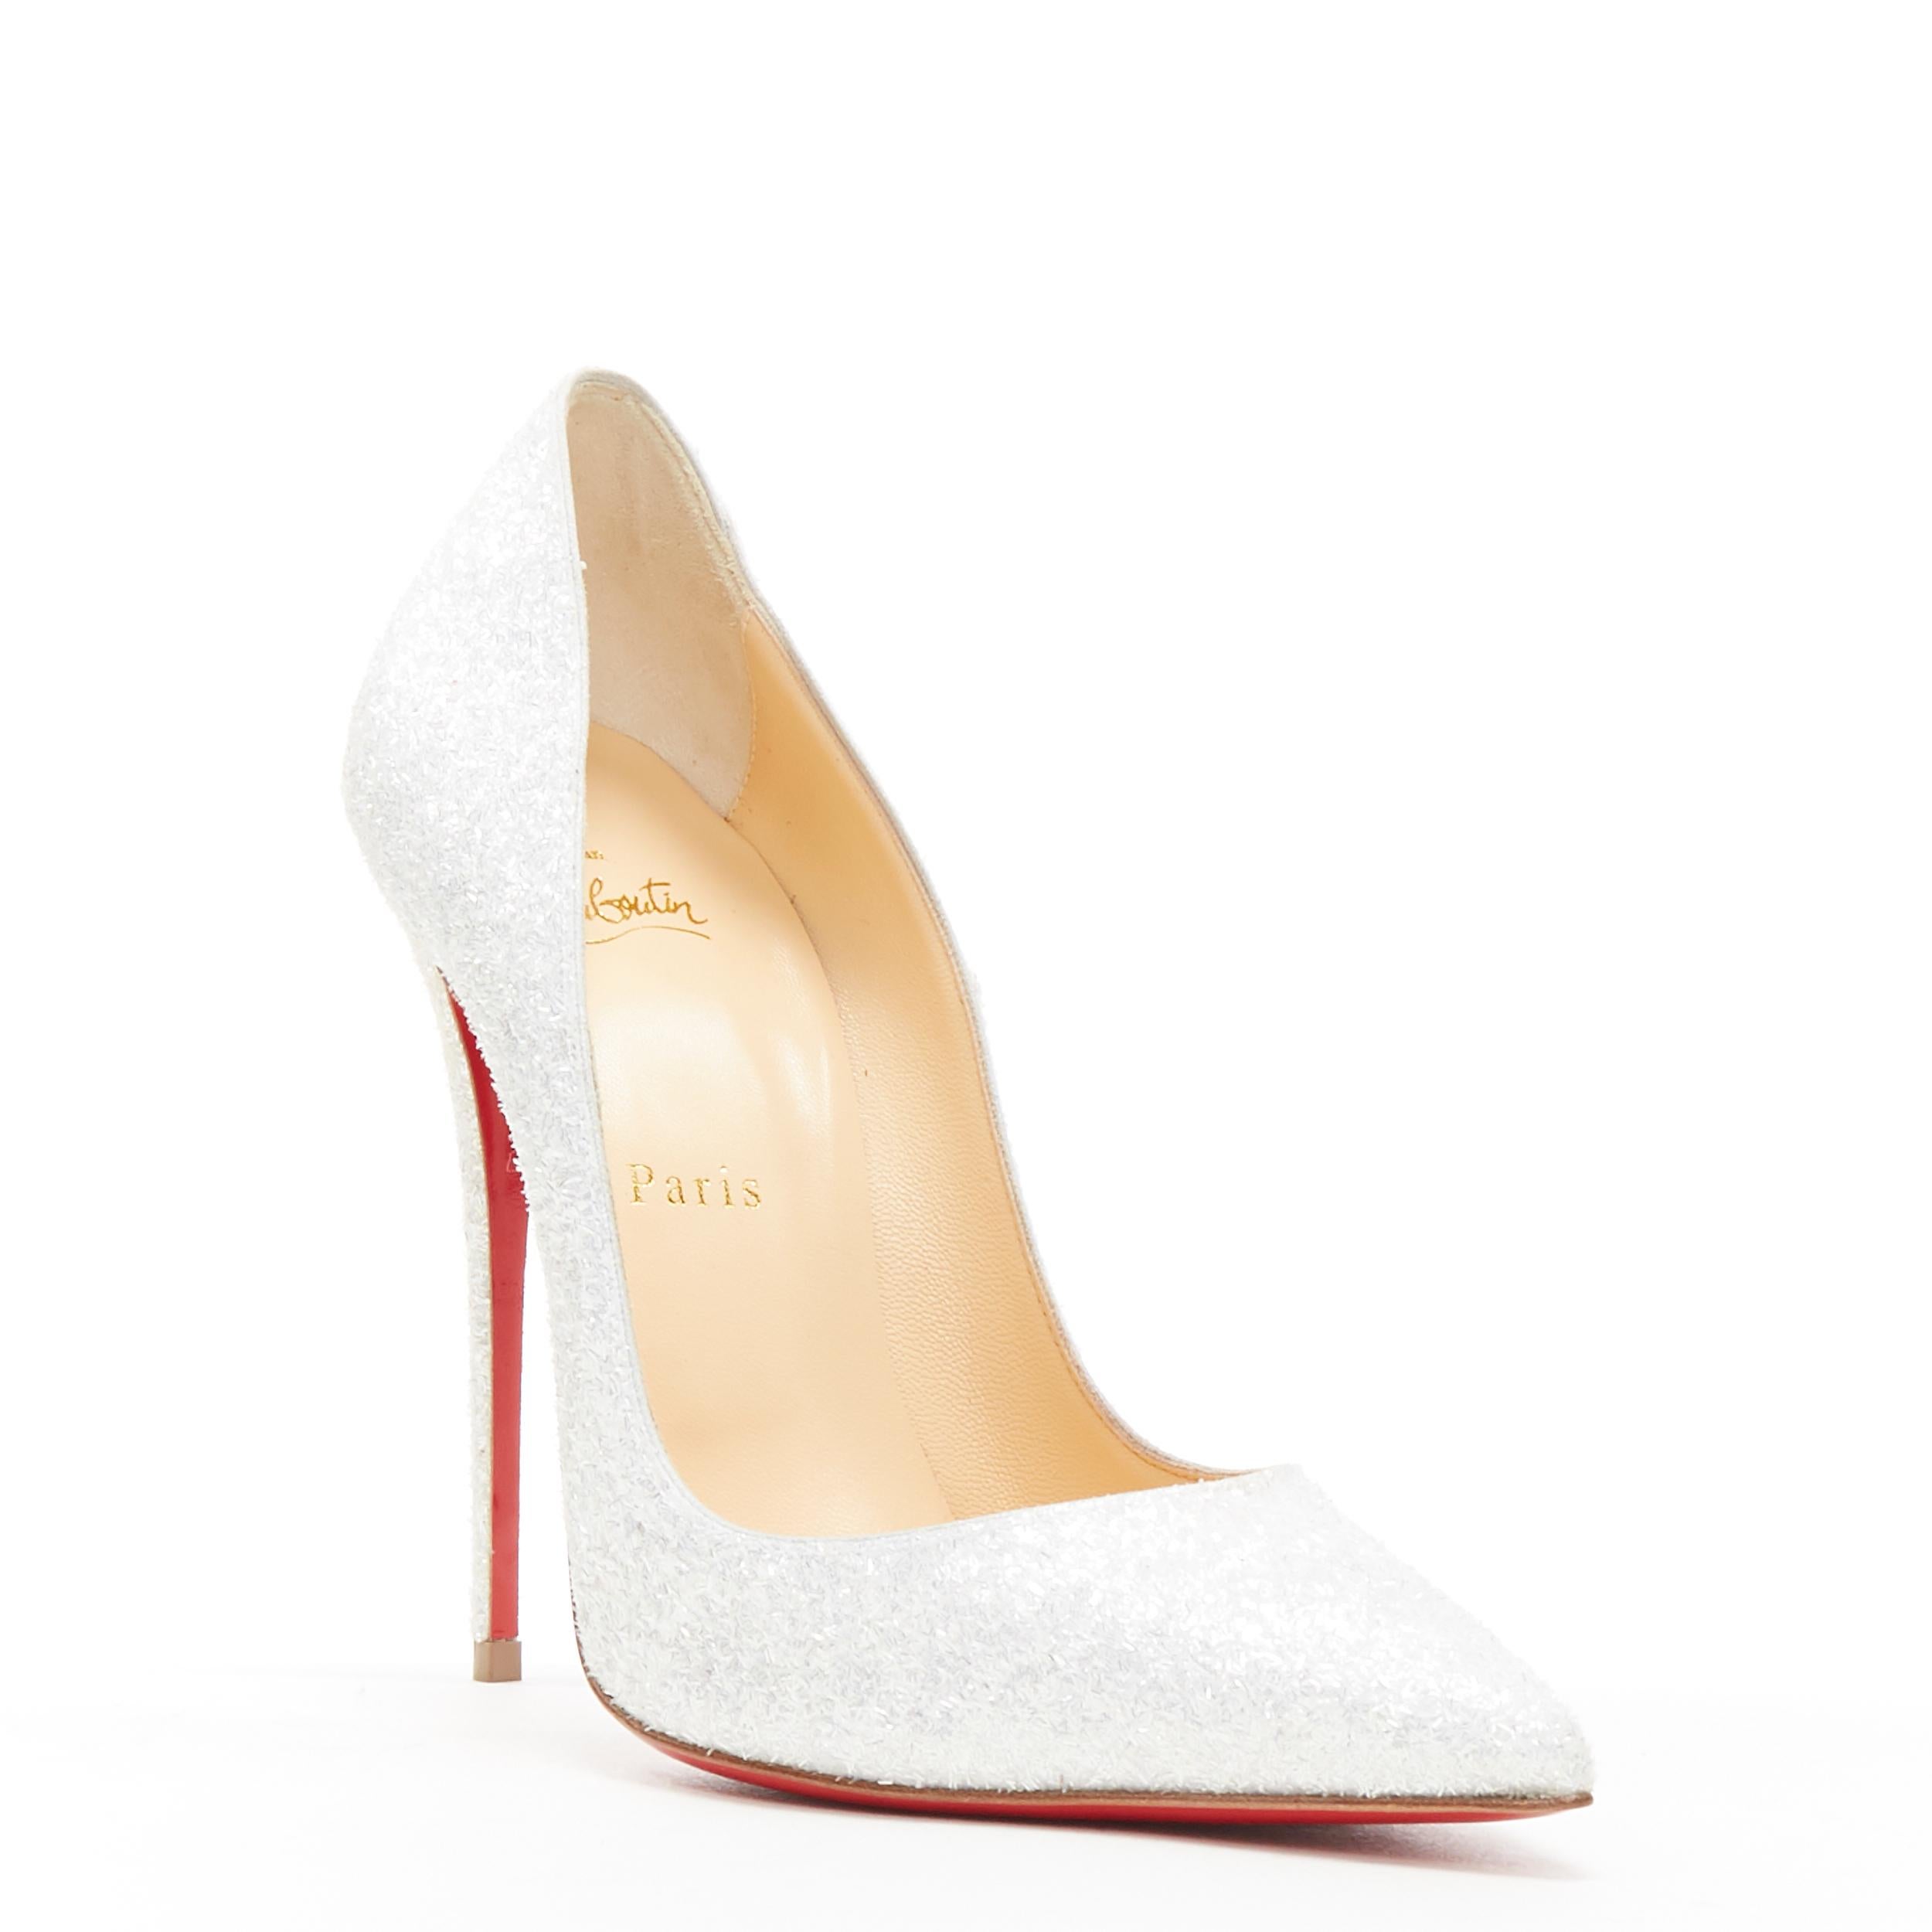 new CHRISTIAN LOUBOUTIN So Kate 120 white glitter pointy bridal pigalle EU40
Brand: Christian Louboutin
Designer: Christian Louboutin
Model Name / Style: So Kate 120
Material: Leather
Color: White
Pattern: Solid
Extra Detail: Style code: 1190030